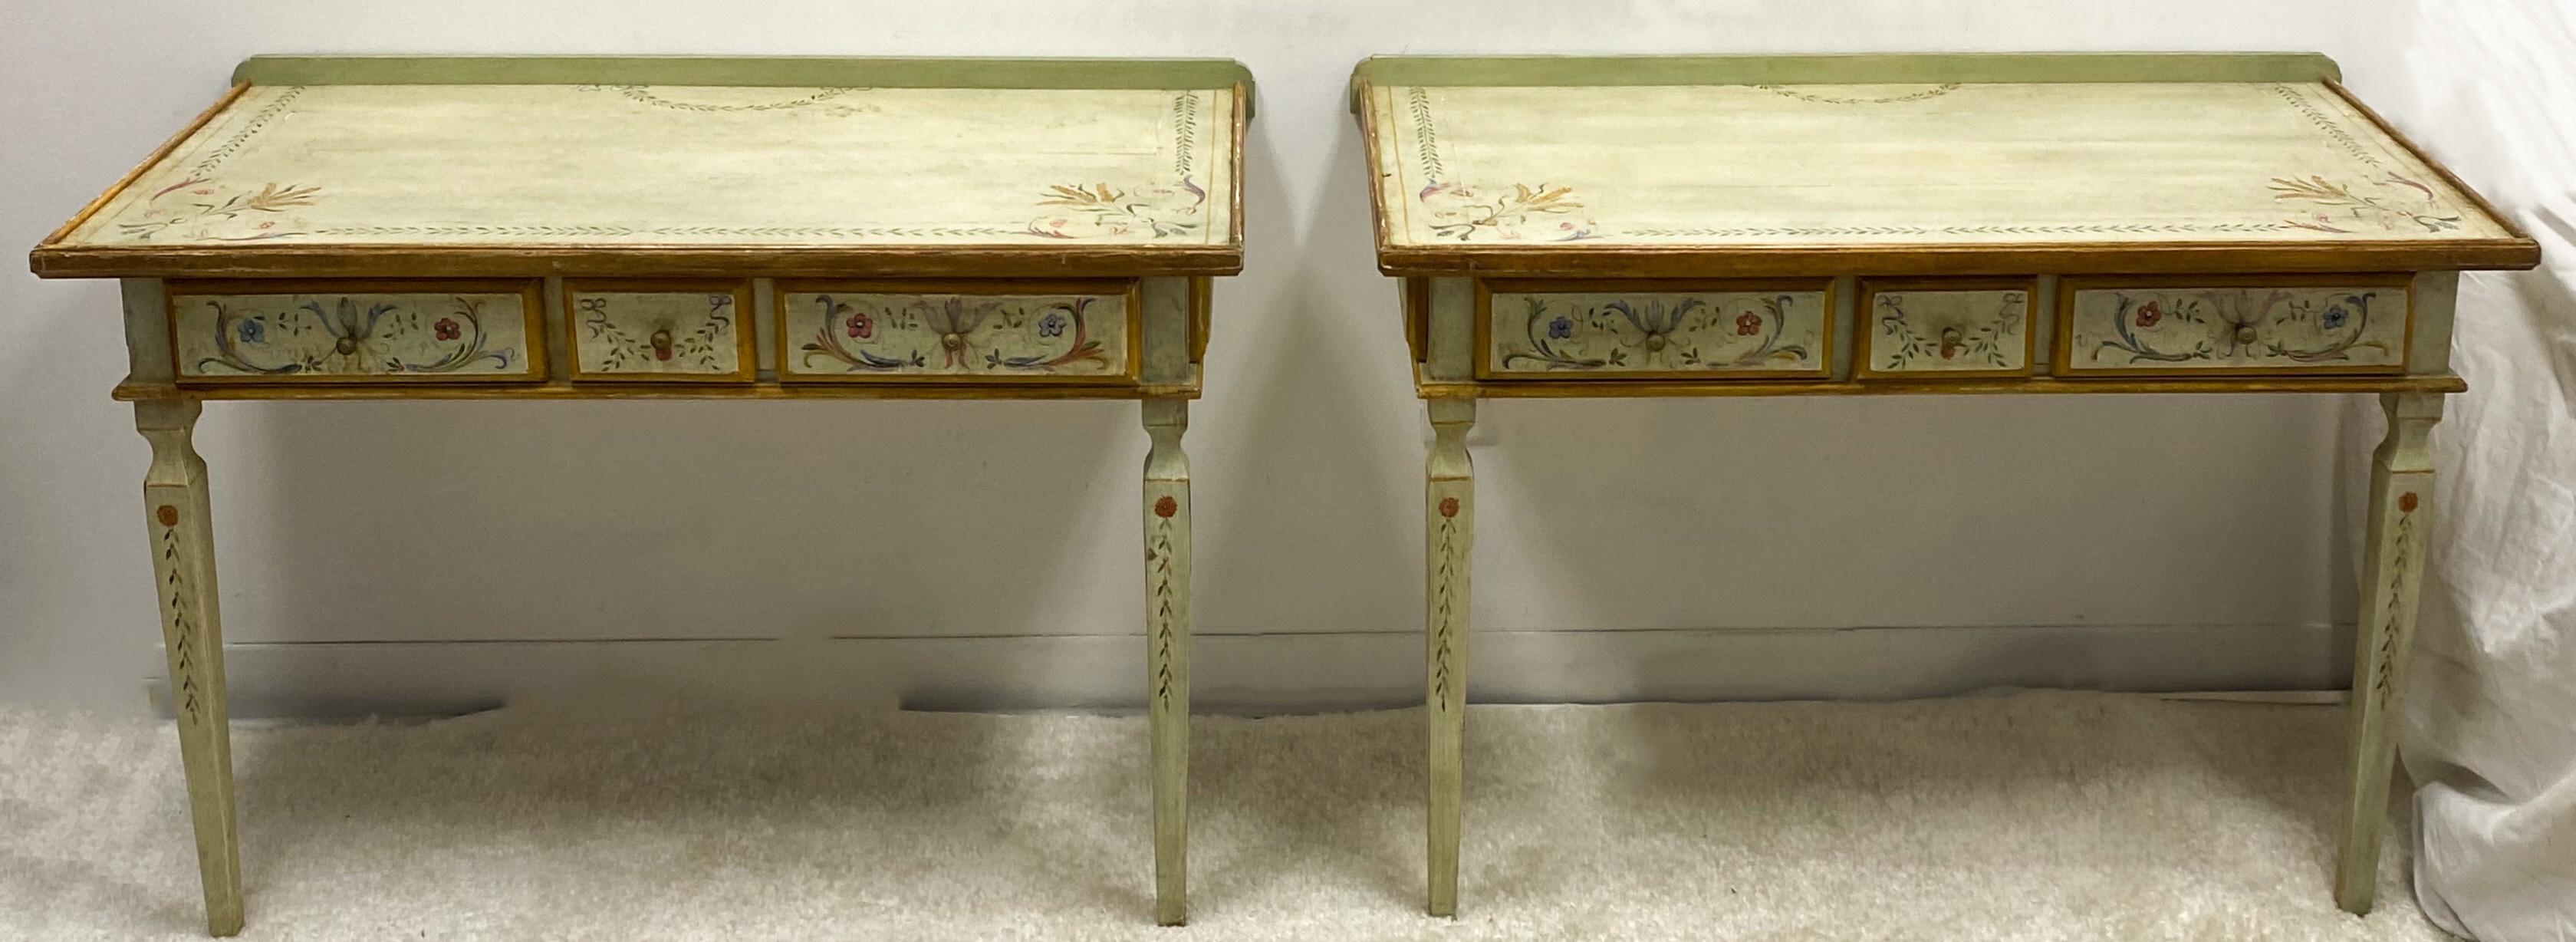 This is a pair of painted French style console tables by Niermann Weeks. They are wall mounted, and each has a single drawer. They appear to be pine. They are intentionally distressed. Each table is marked.